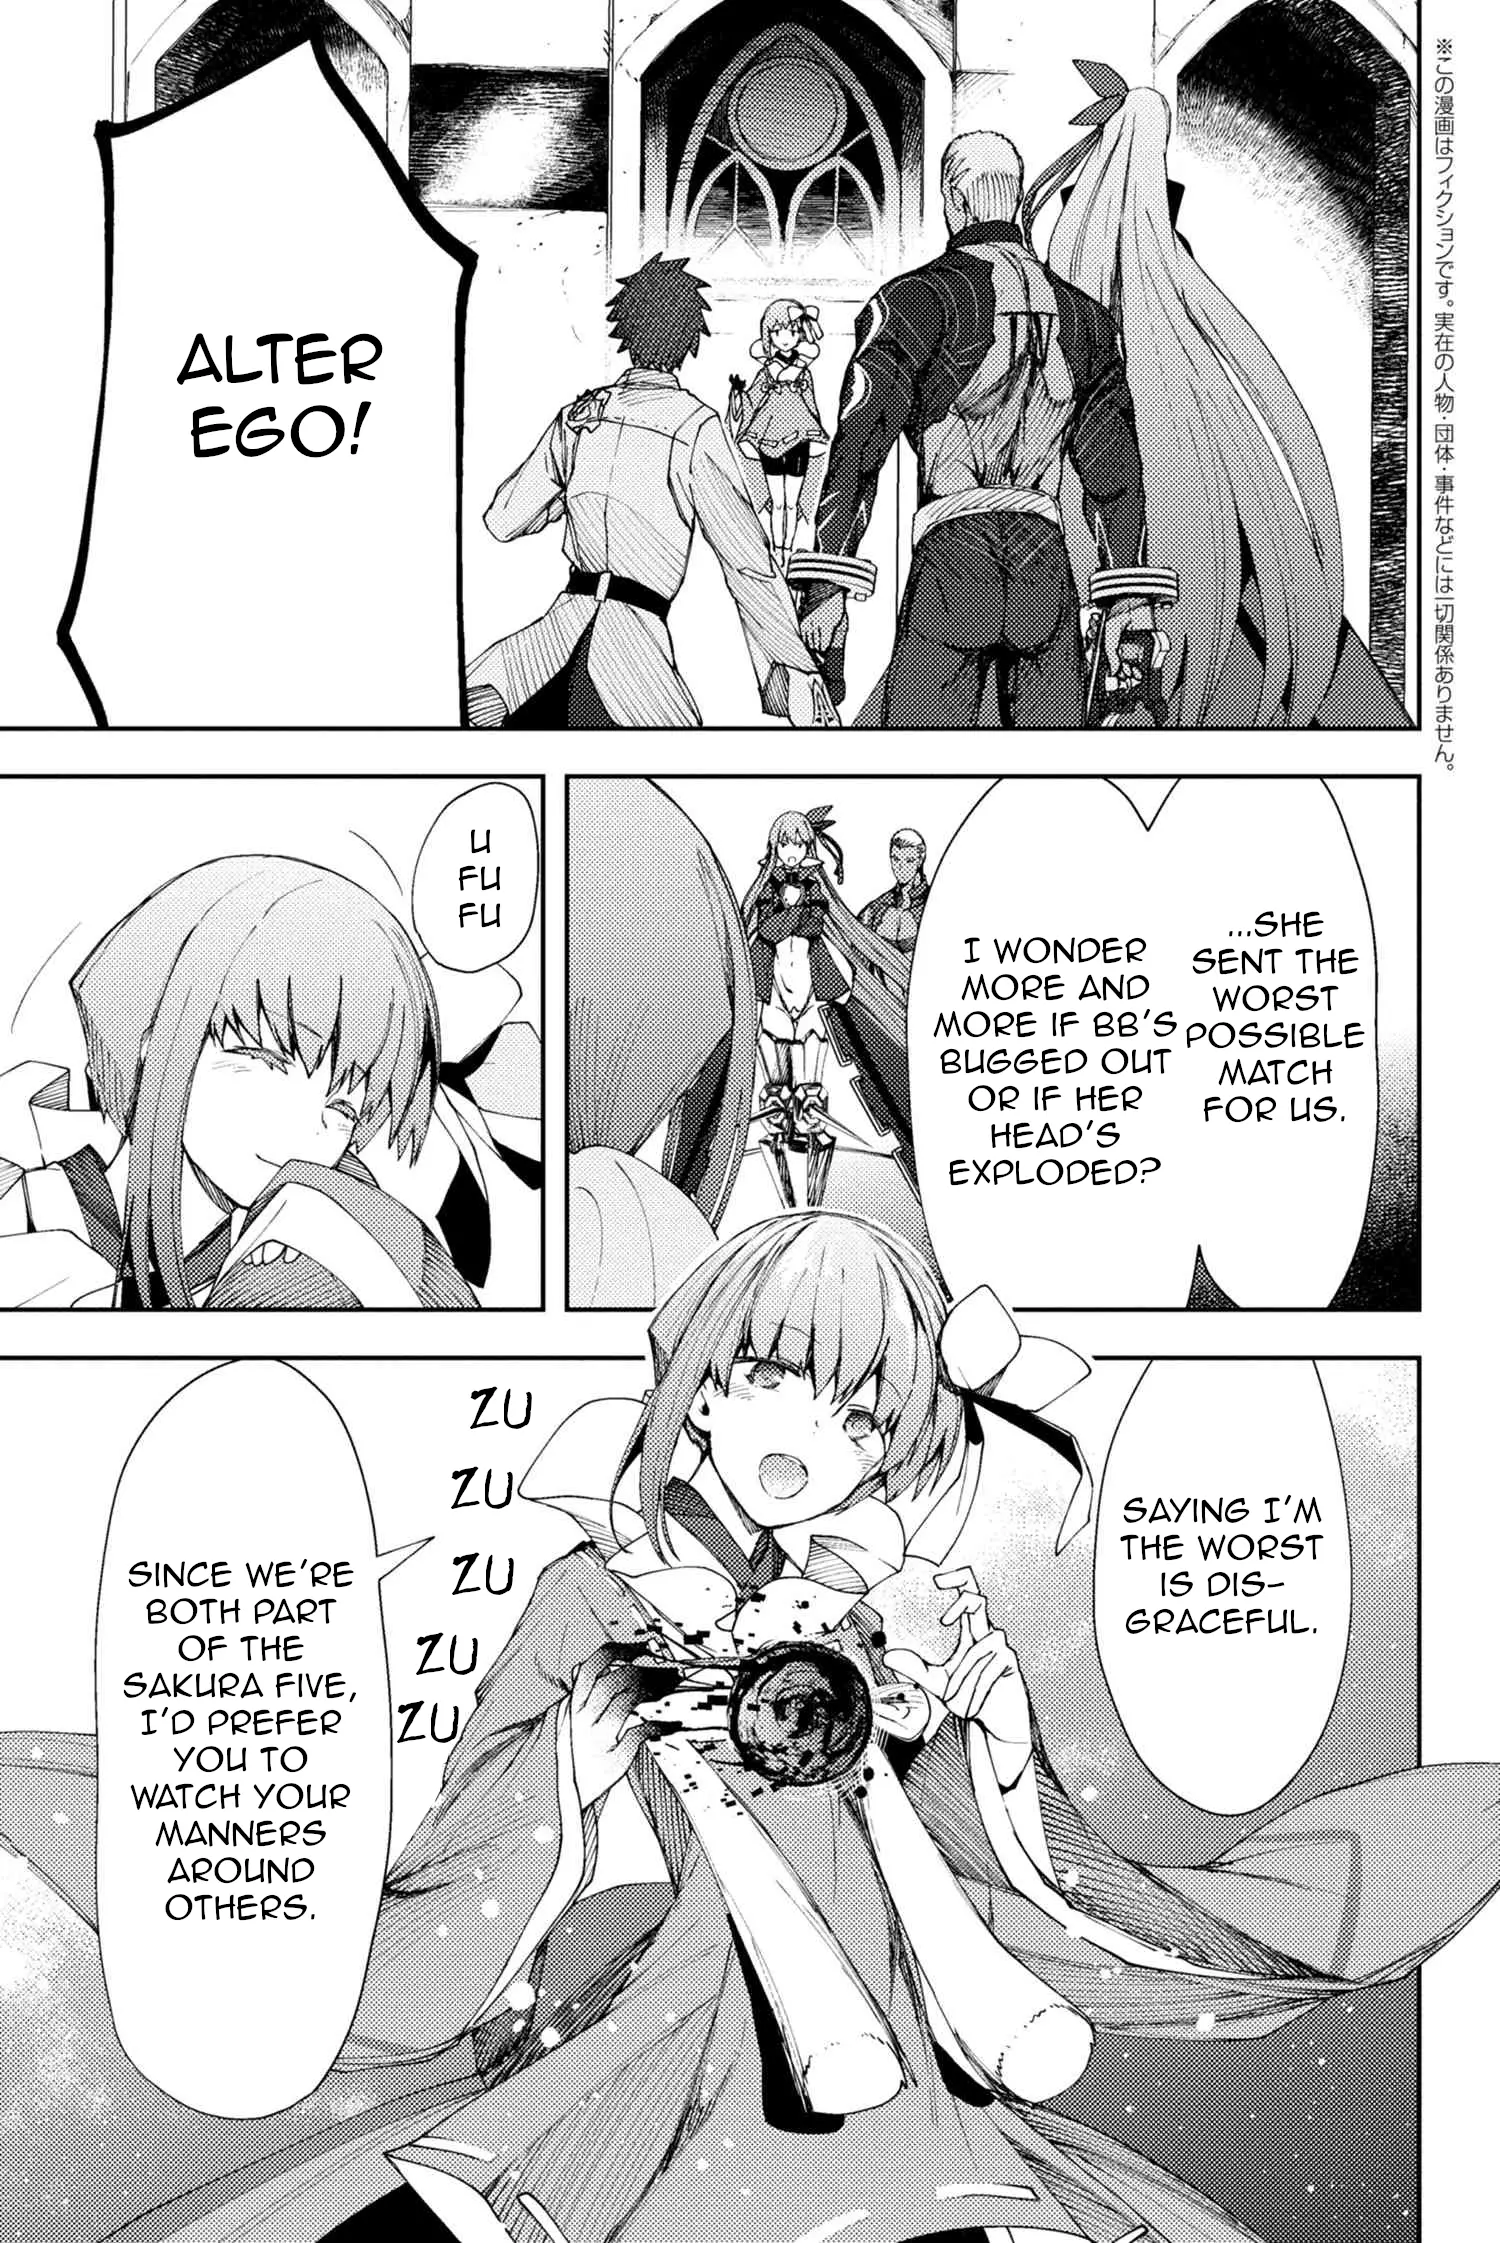 Fate/grand Order -Epic Of Remnant- Deep Sea Cyber-Paradise Se.ra.ph - 8.2 page 2